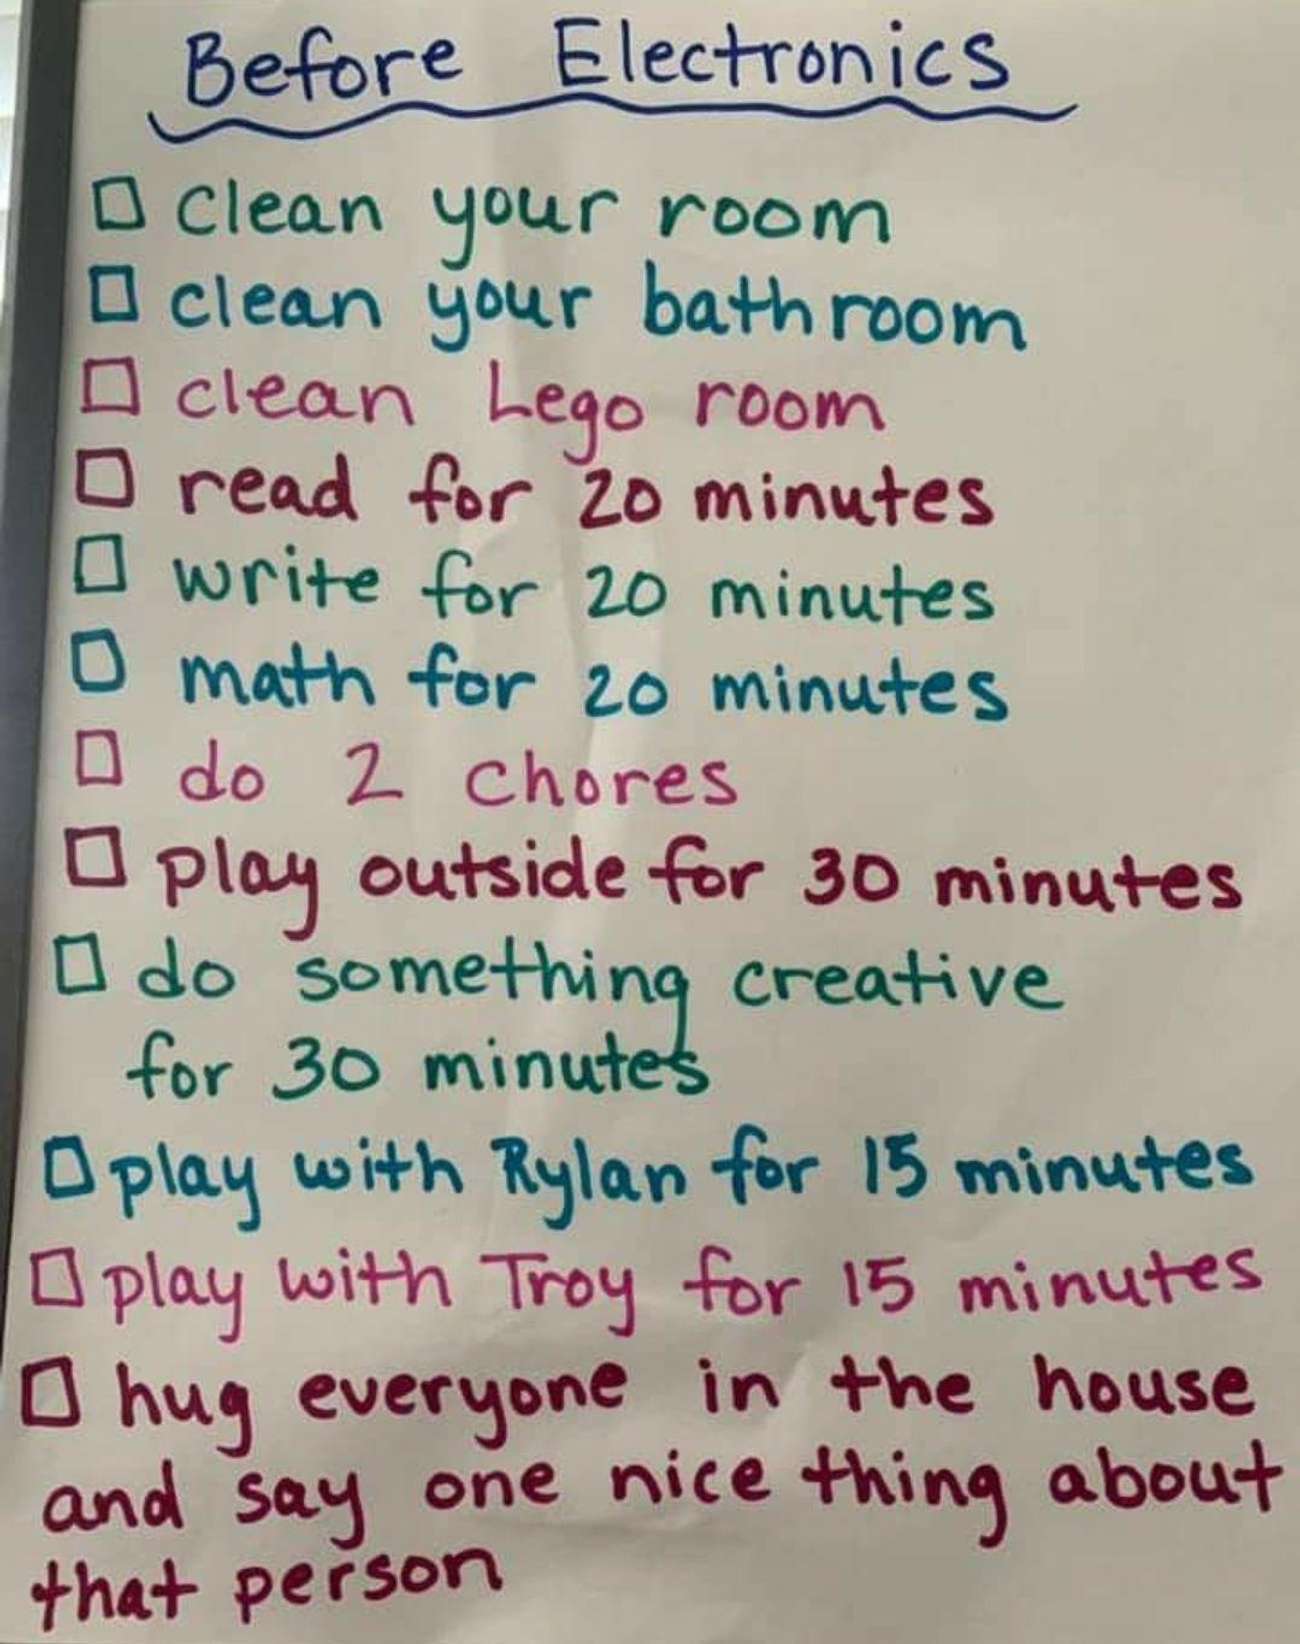 handwriting - Before Electronics o clean your room clean your bathroom I clean Lego room I read for 20 minutes write for 20 minutes o math for 20 minutes do 2 chores play outside for 30 minutes O do something creative for 30 minutes o play with Rylan for